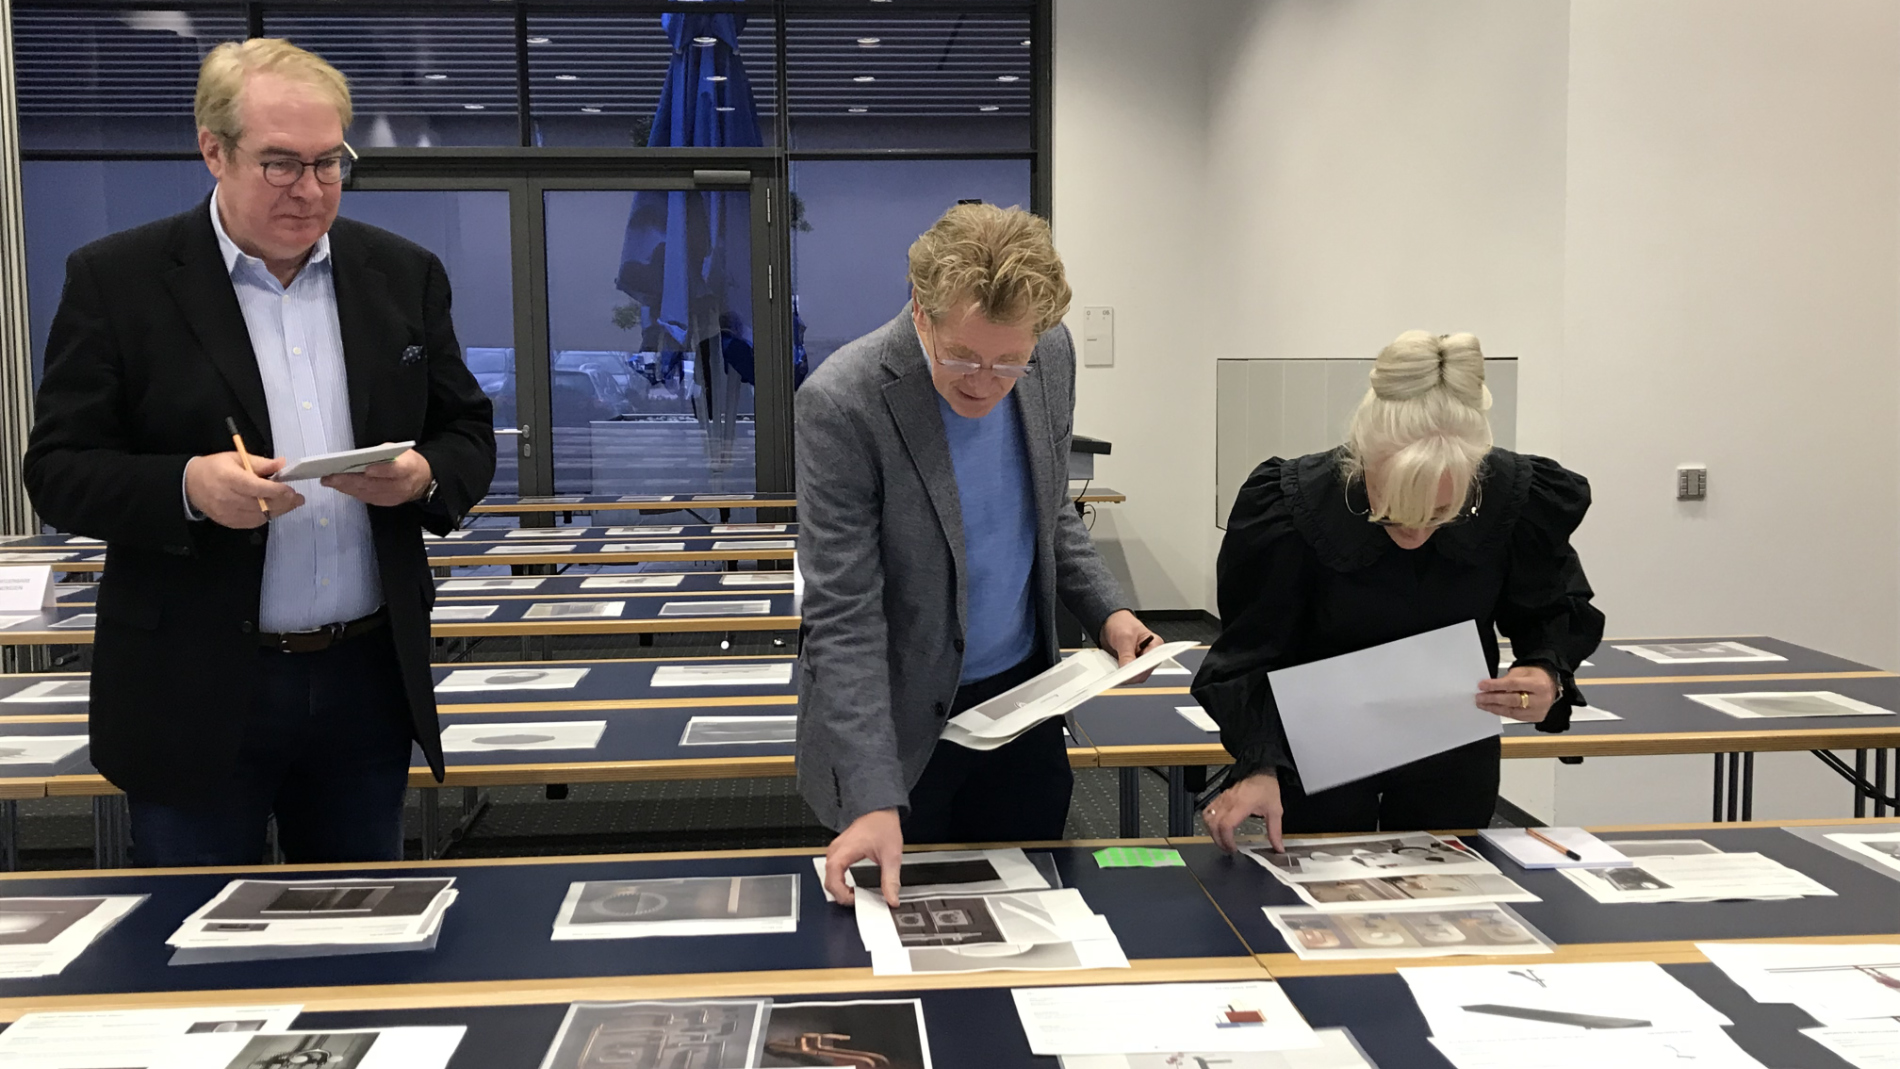 All entries were first considered individually by the jurors and then discussed and evaluated together. From left to right: Jens Wischmann, Bernhard Heitz and Dr. Sandra Hofmeister. (Source: Messe Frankfurt Exhibition GmbH)